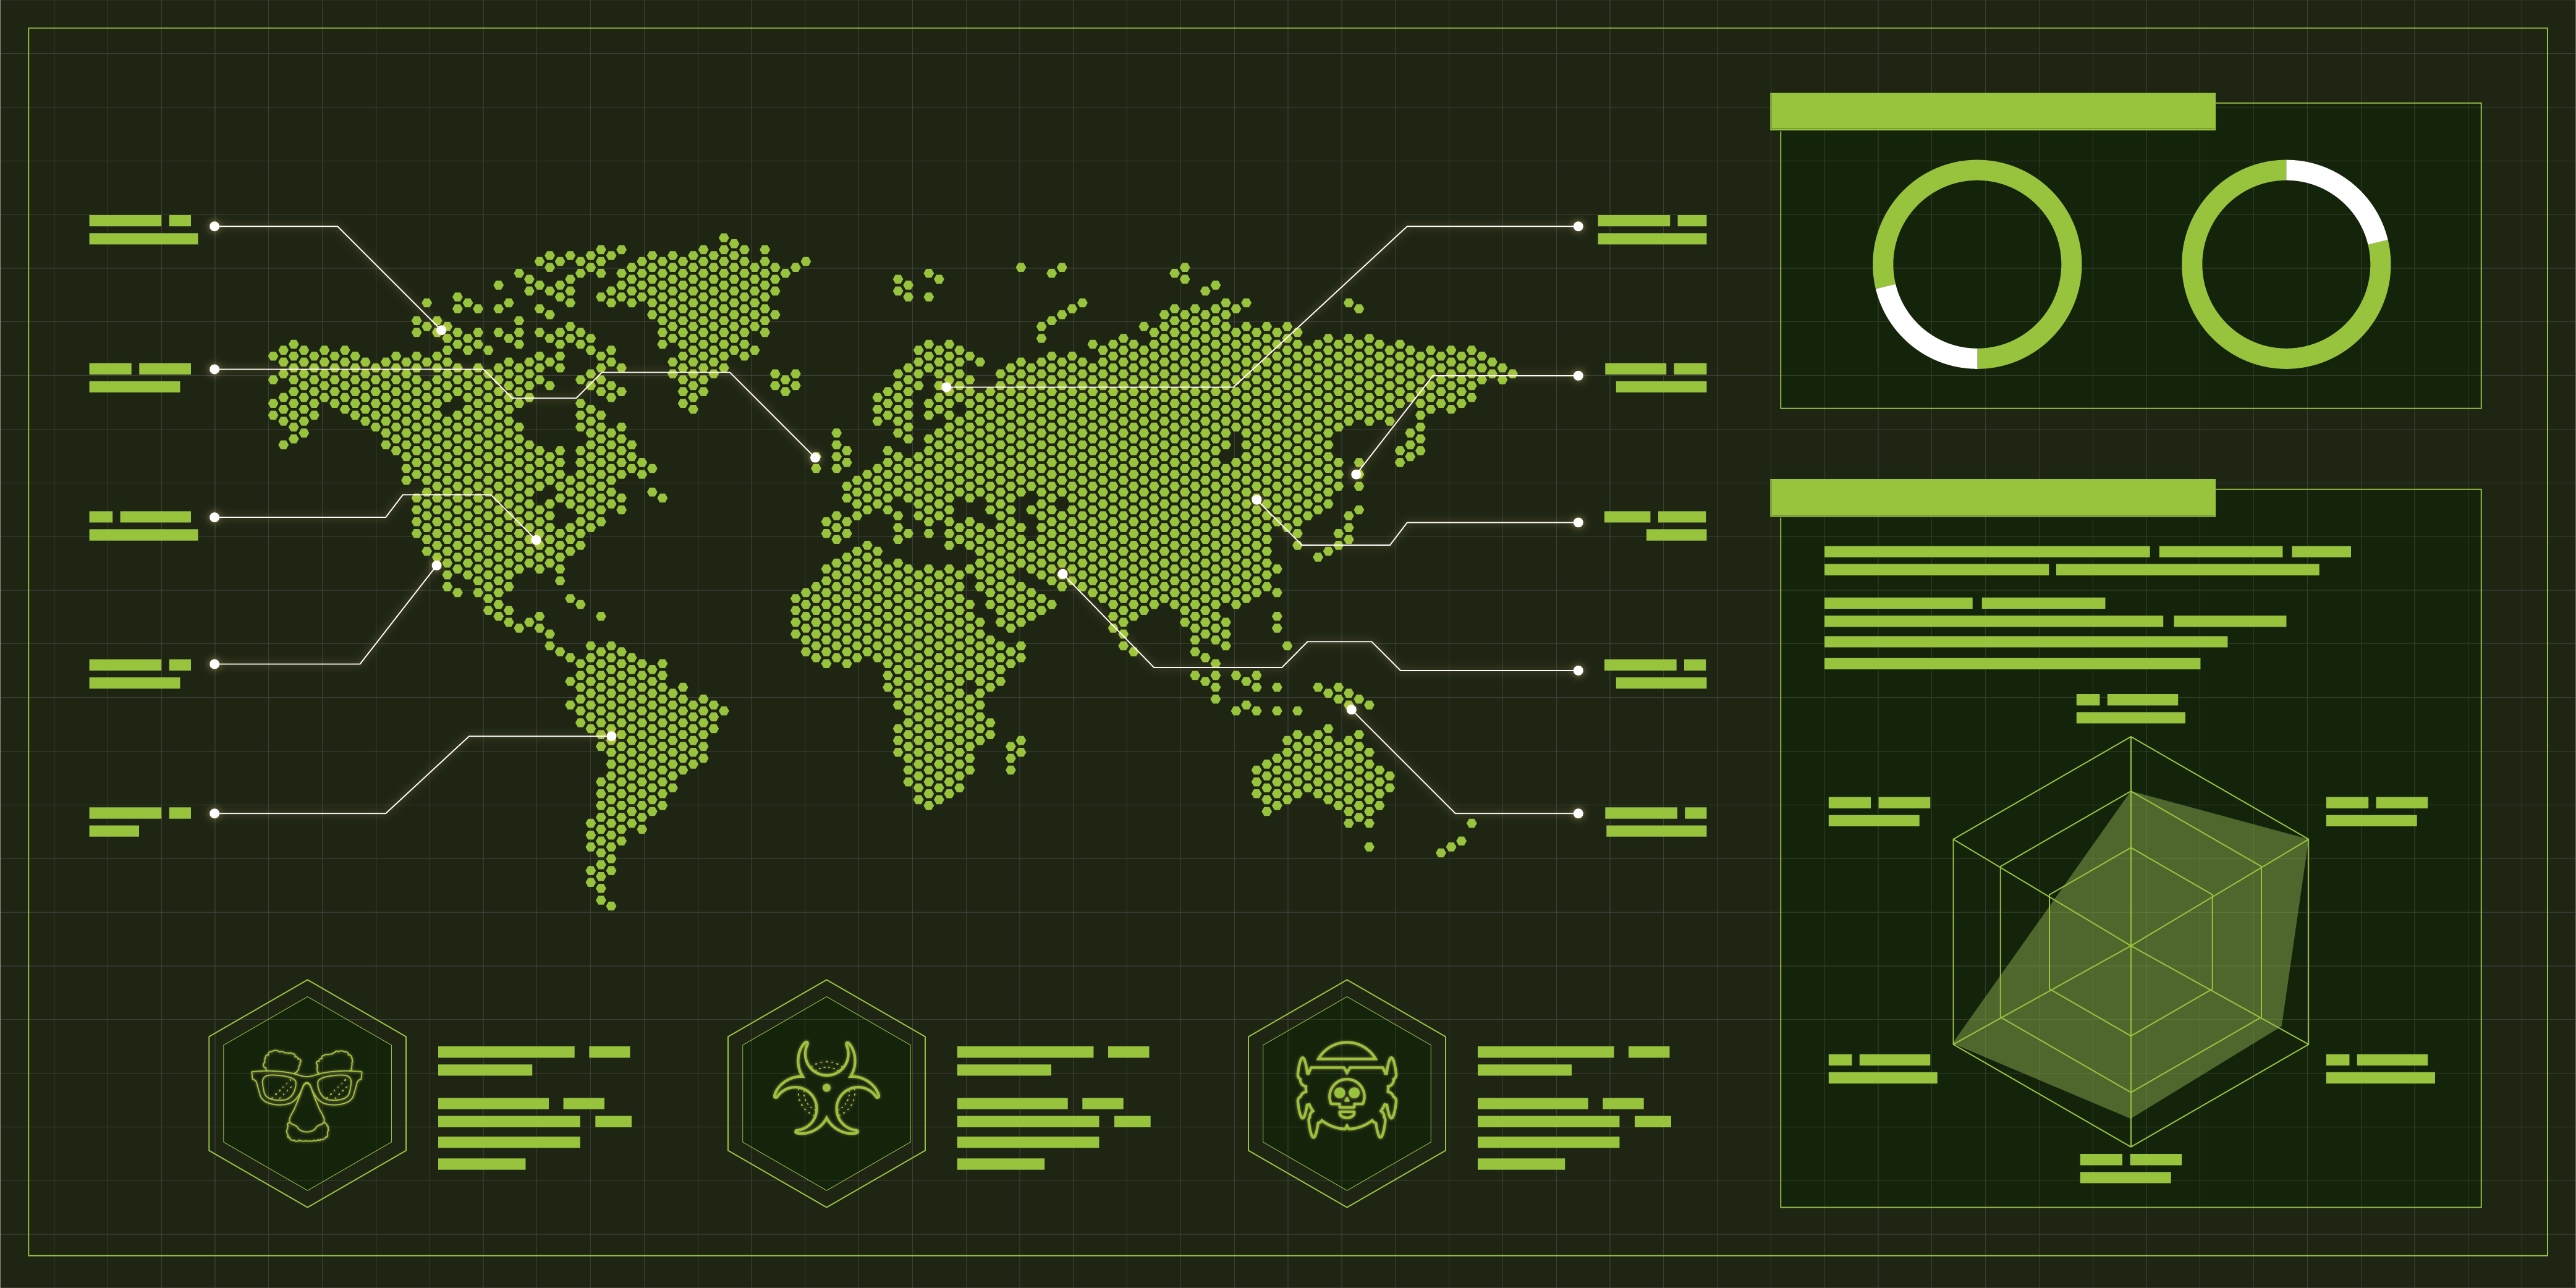 A conceptual illustration showing a world map along with icons representing malware and other tools used by malicious actors